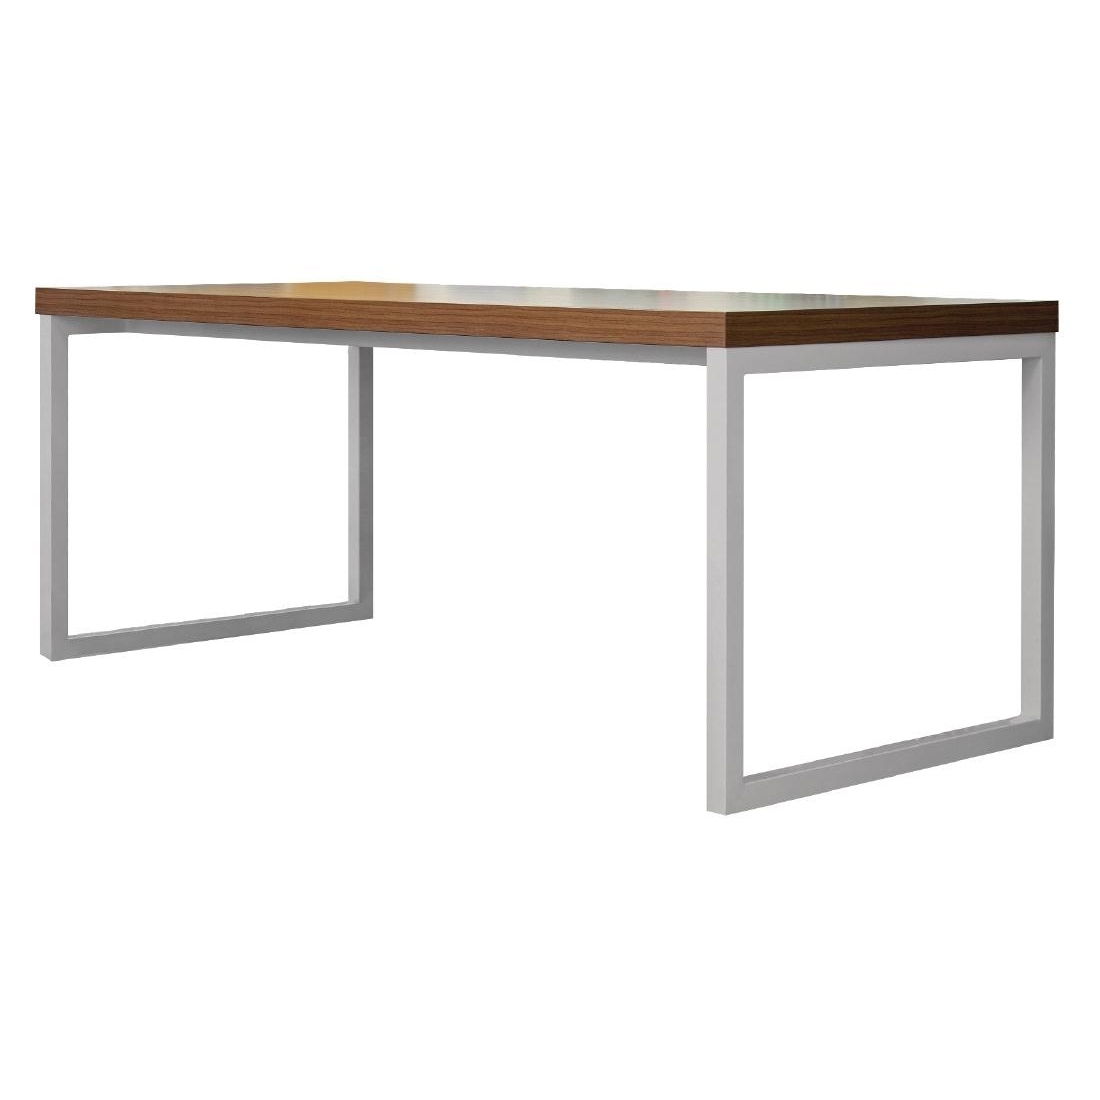 Bolero Dining Table Walnut Effect with Silver Frame 6ft